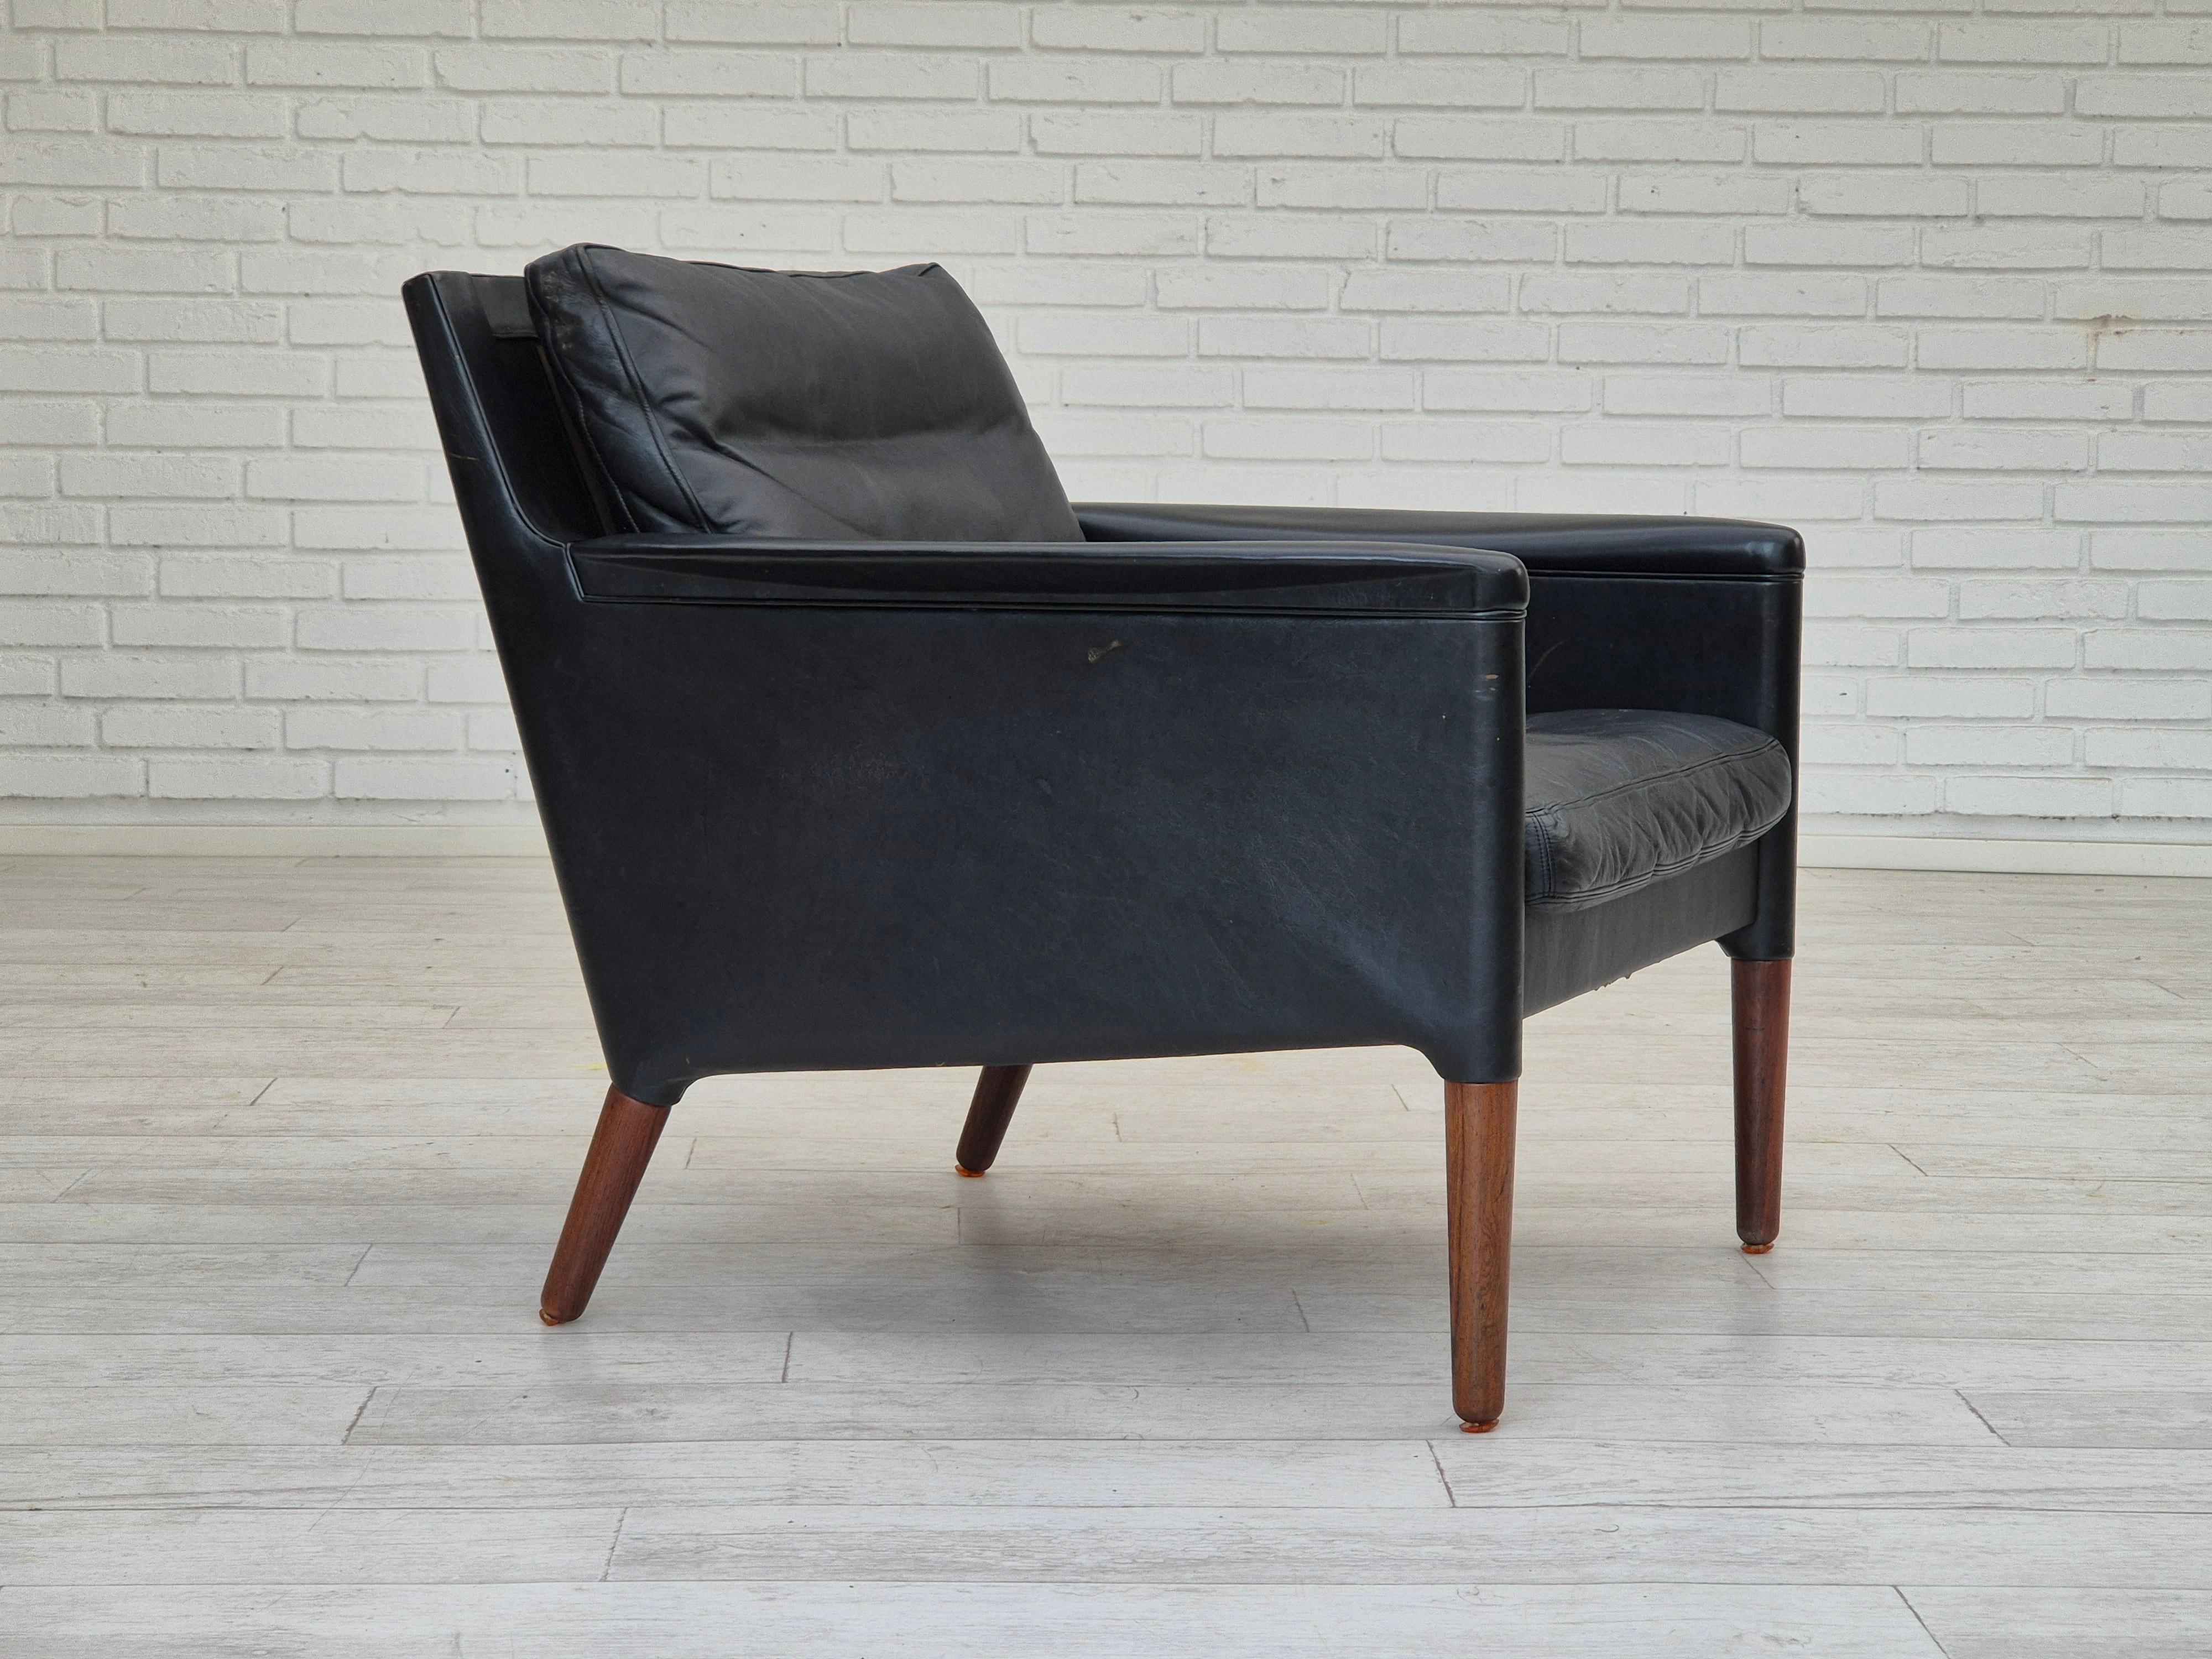 1960s, Danish design by Kurt Østervig. Lounge chair model 55. Black leather, rosewood legs. Original very good condition: no smells and no stains. Manufactured by Danish furniture manufacturer Centrum Møbler in about 1965. (Designmuseum Danmark,